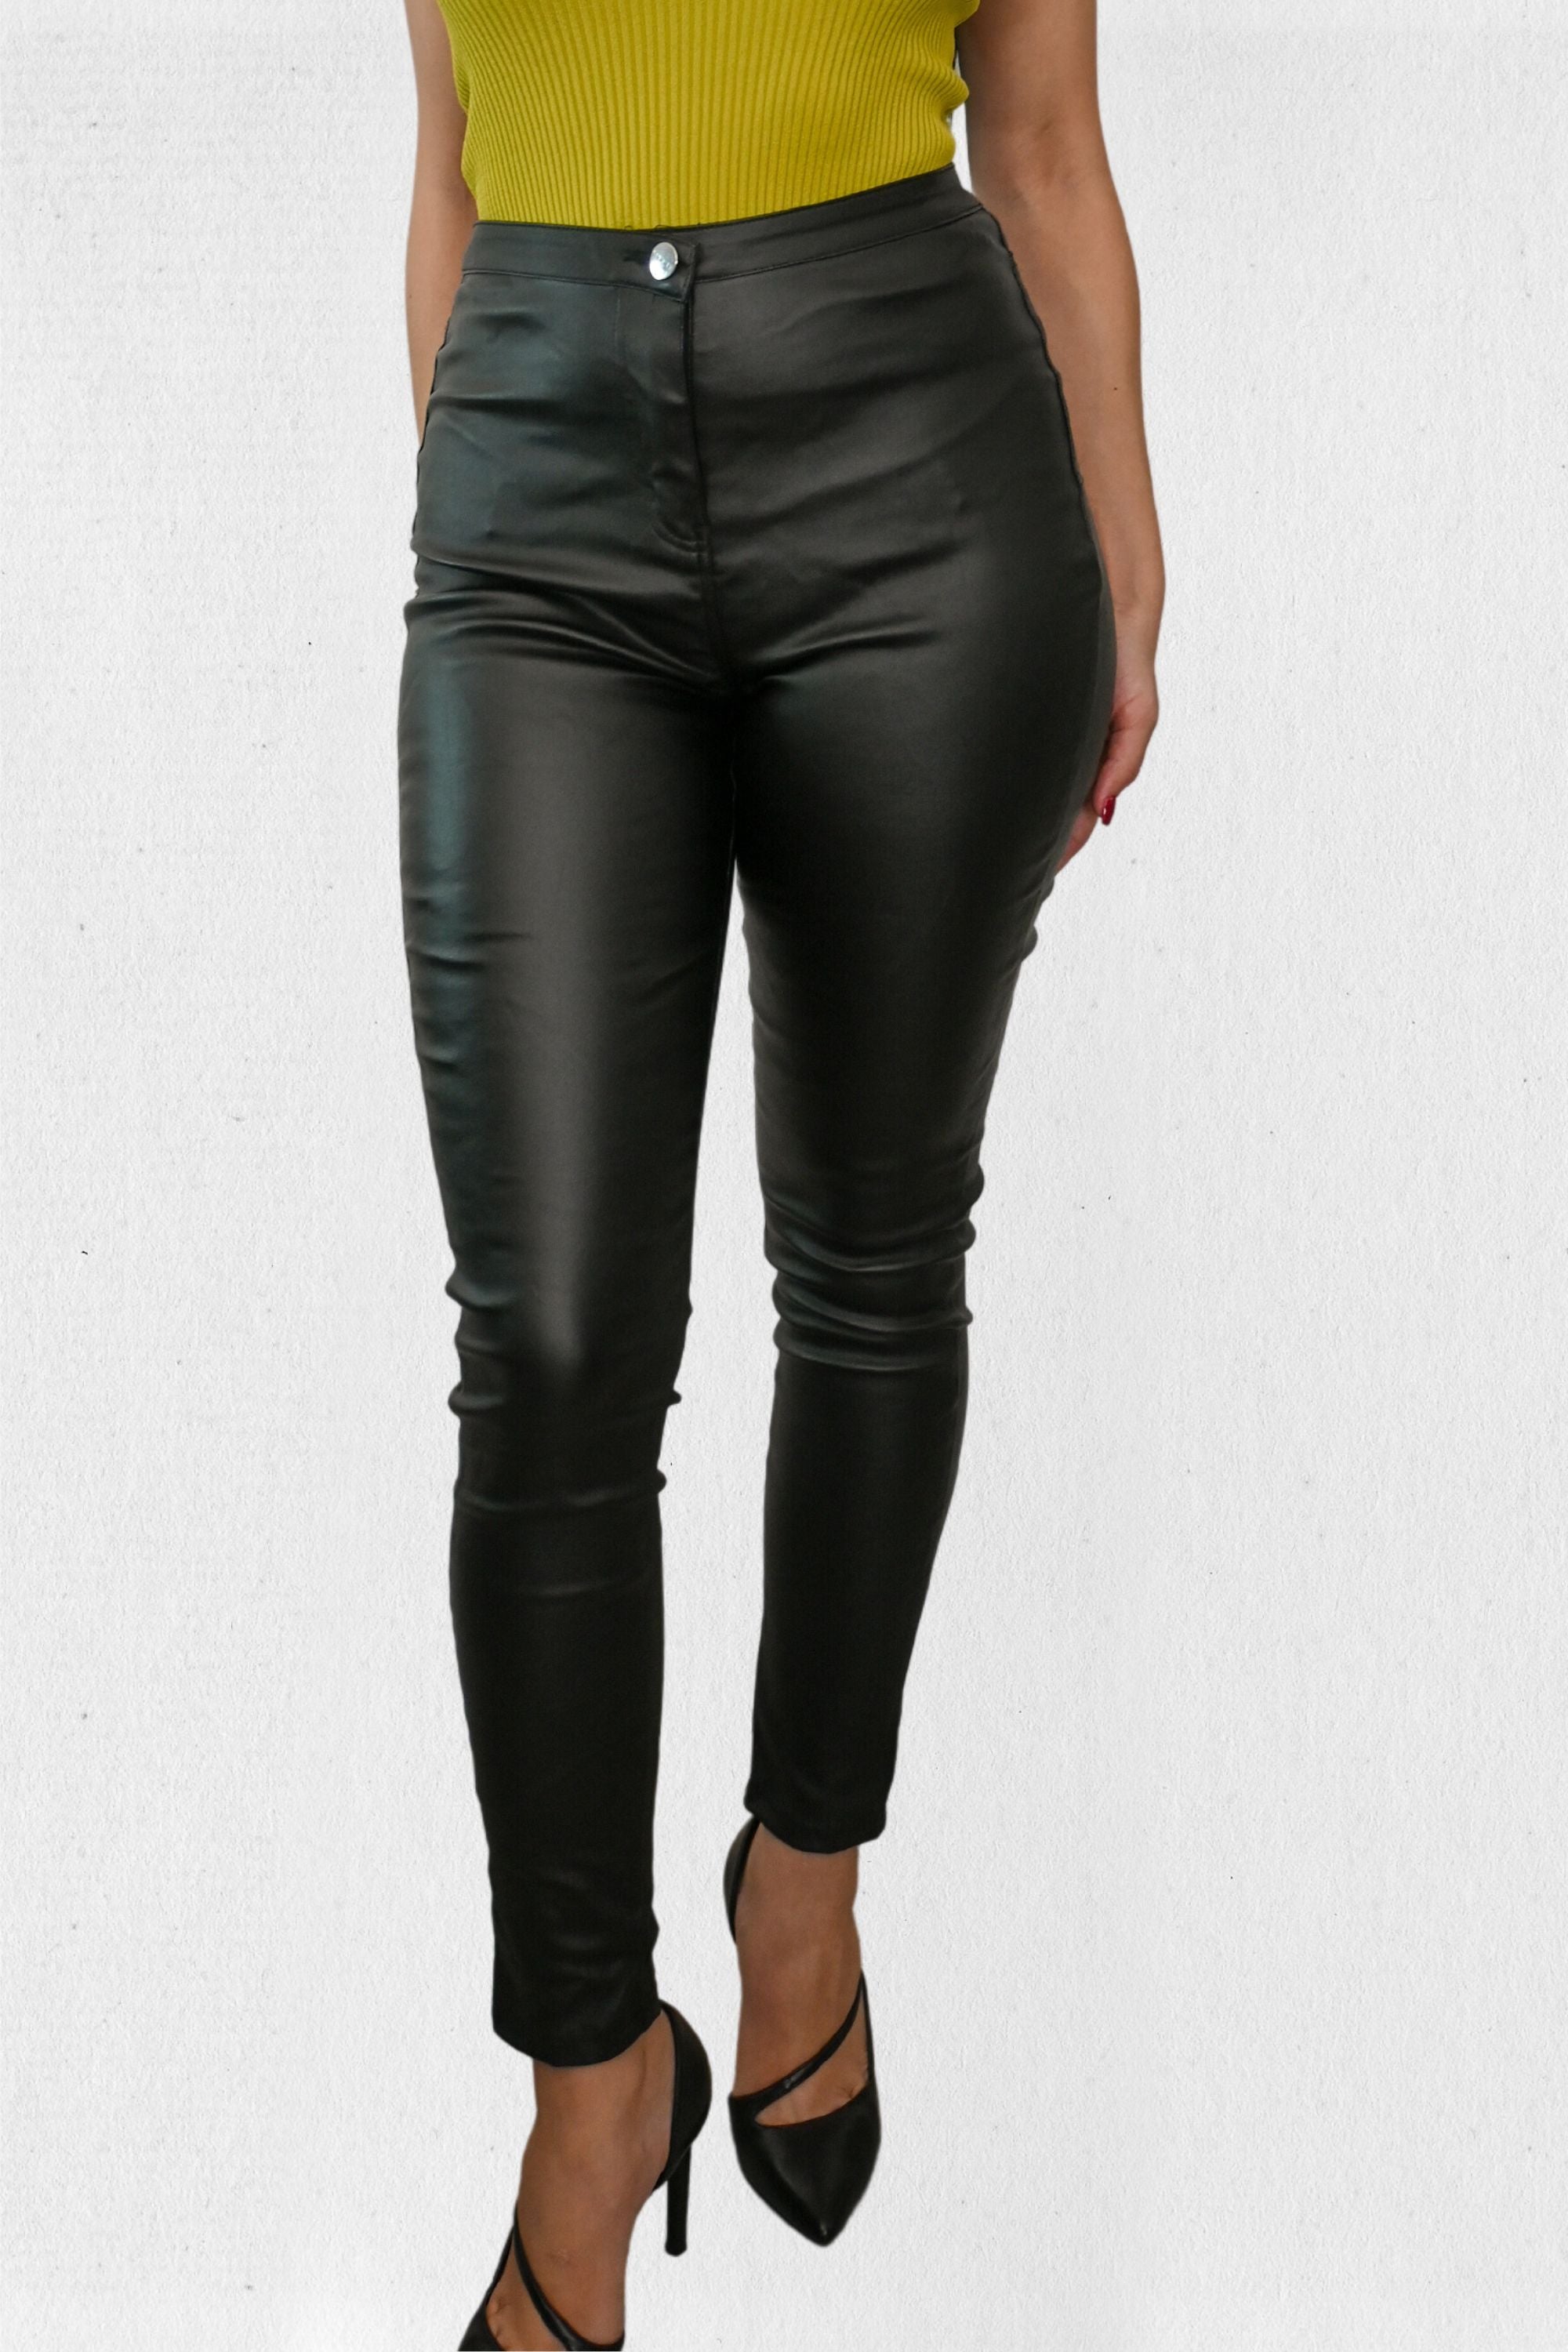 Leather looking jeggings